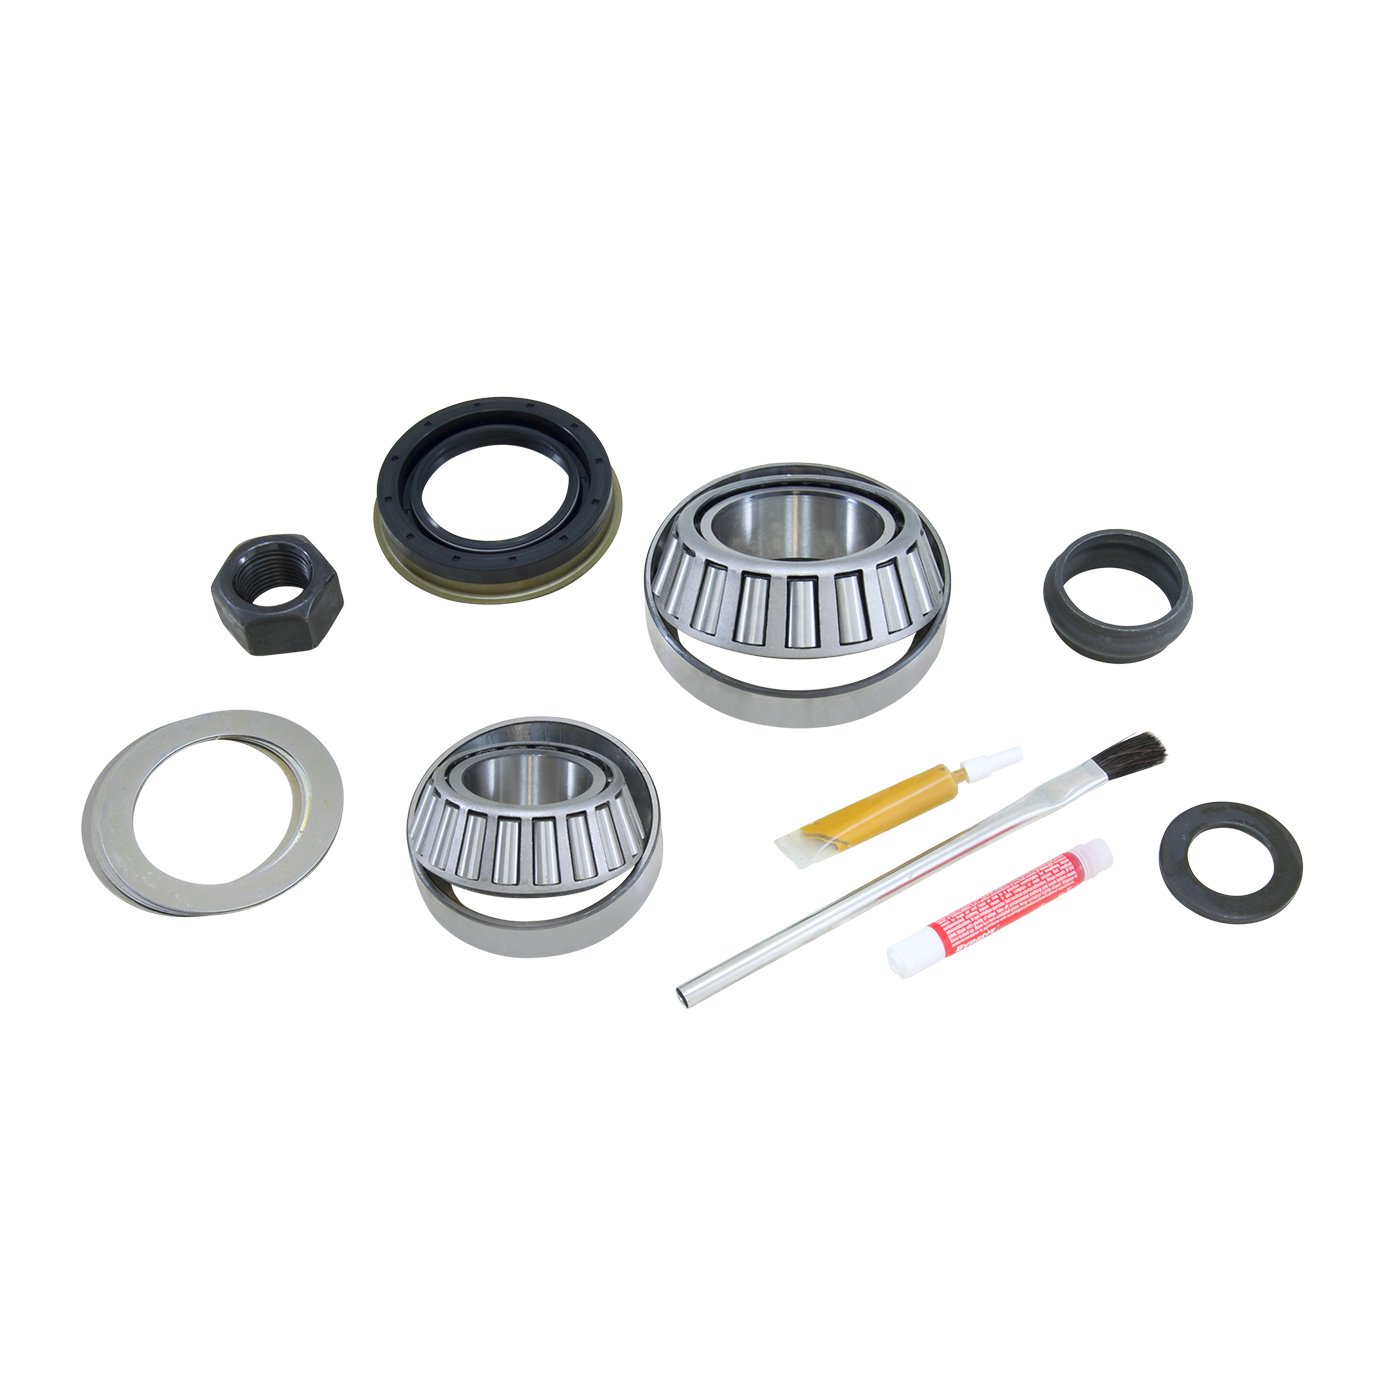 Pinion Install Kit For '00-'03 Chrysler 8 in. Ifs Differential.